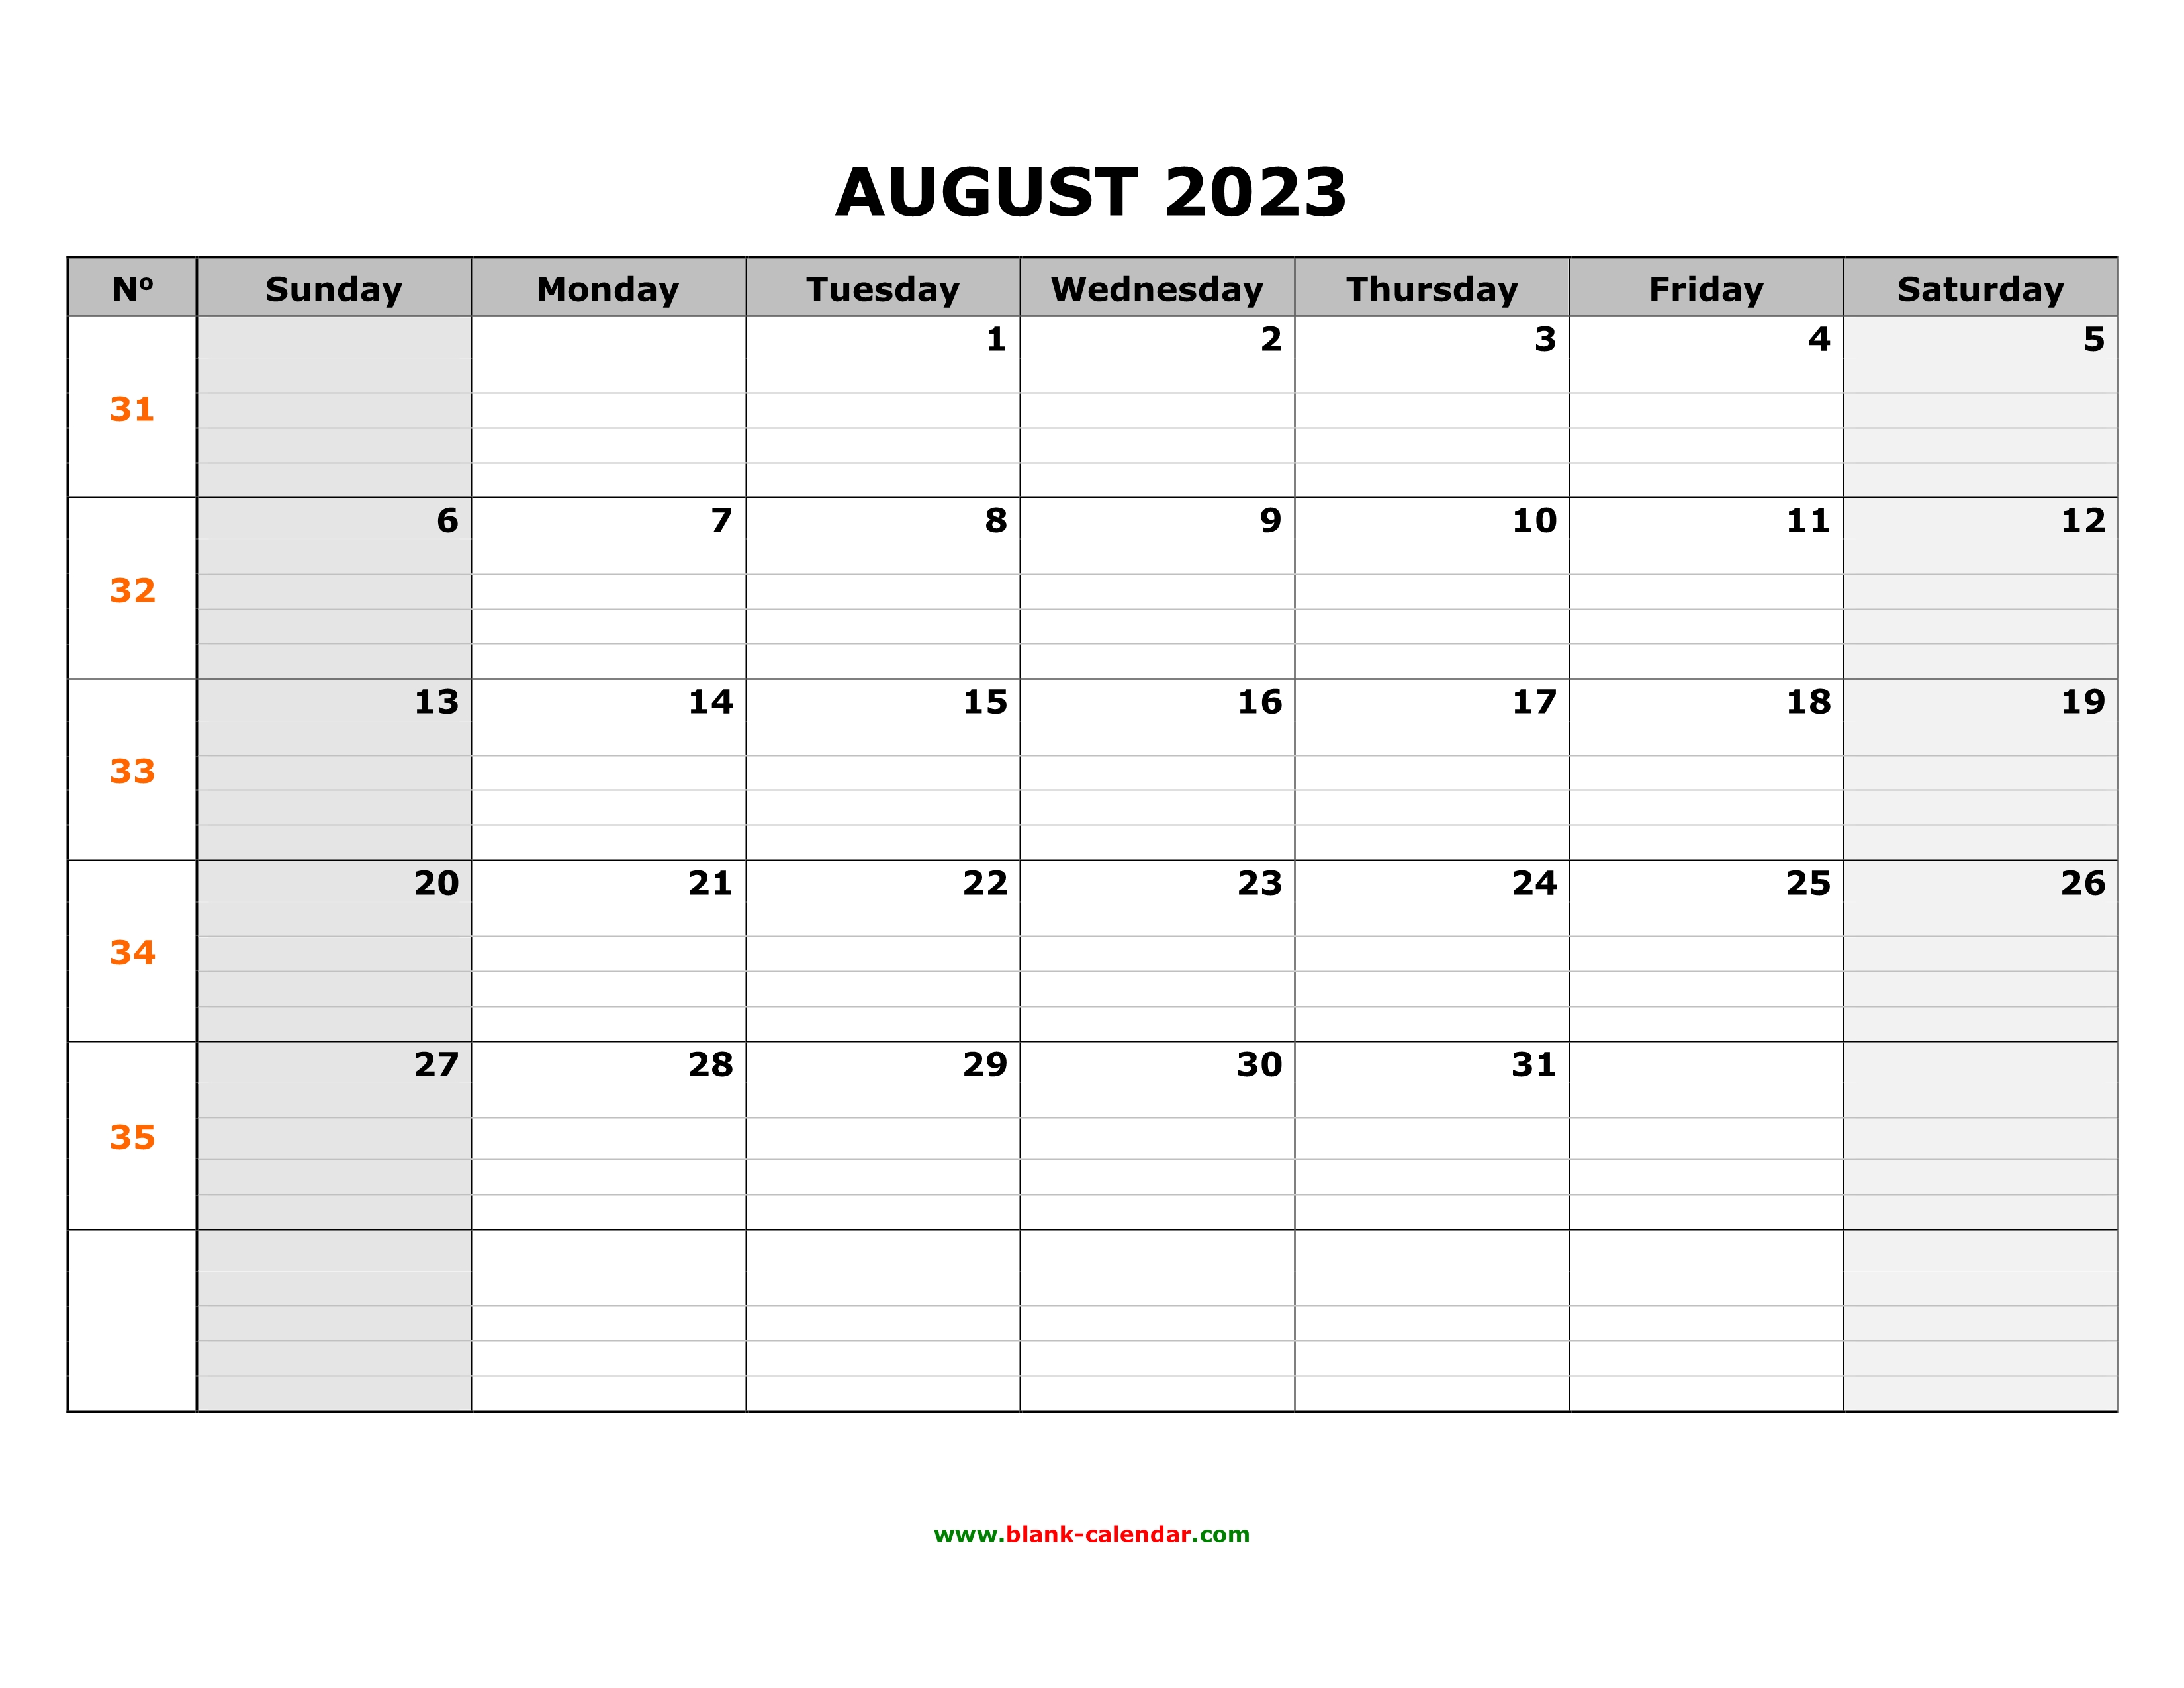 Free Download Printable August 2023 Calendar, large box grid, space for